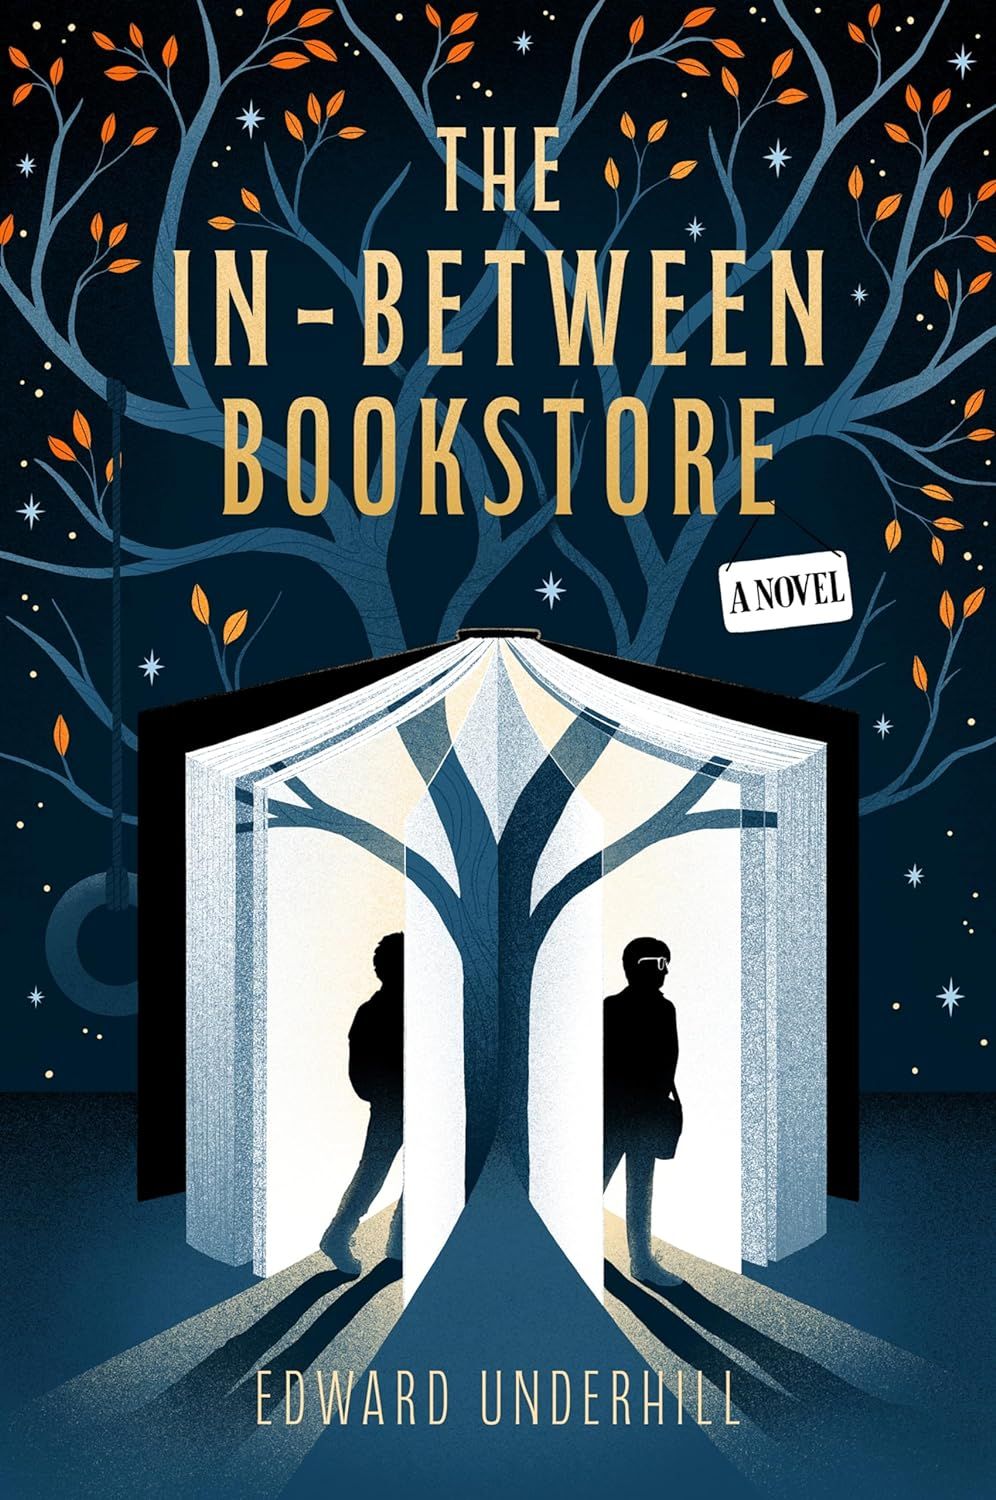 The In Between Bookstore by Edward Underhill - book cover